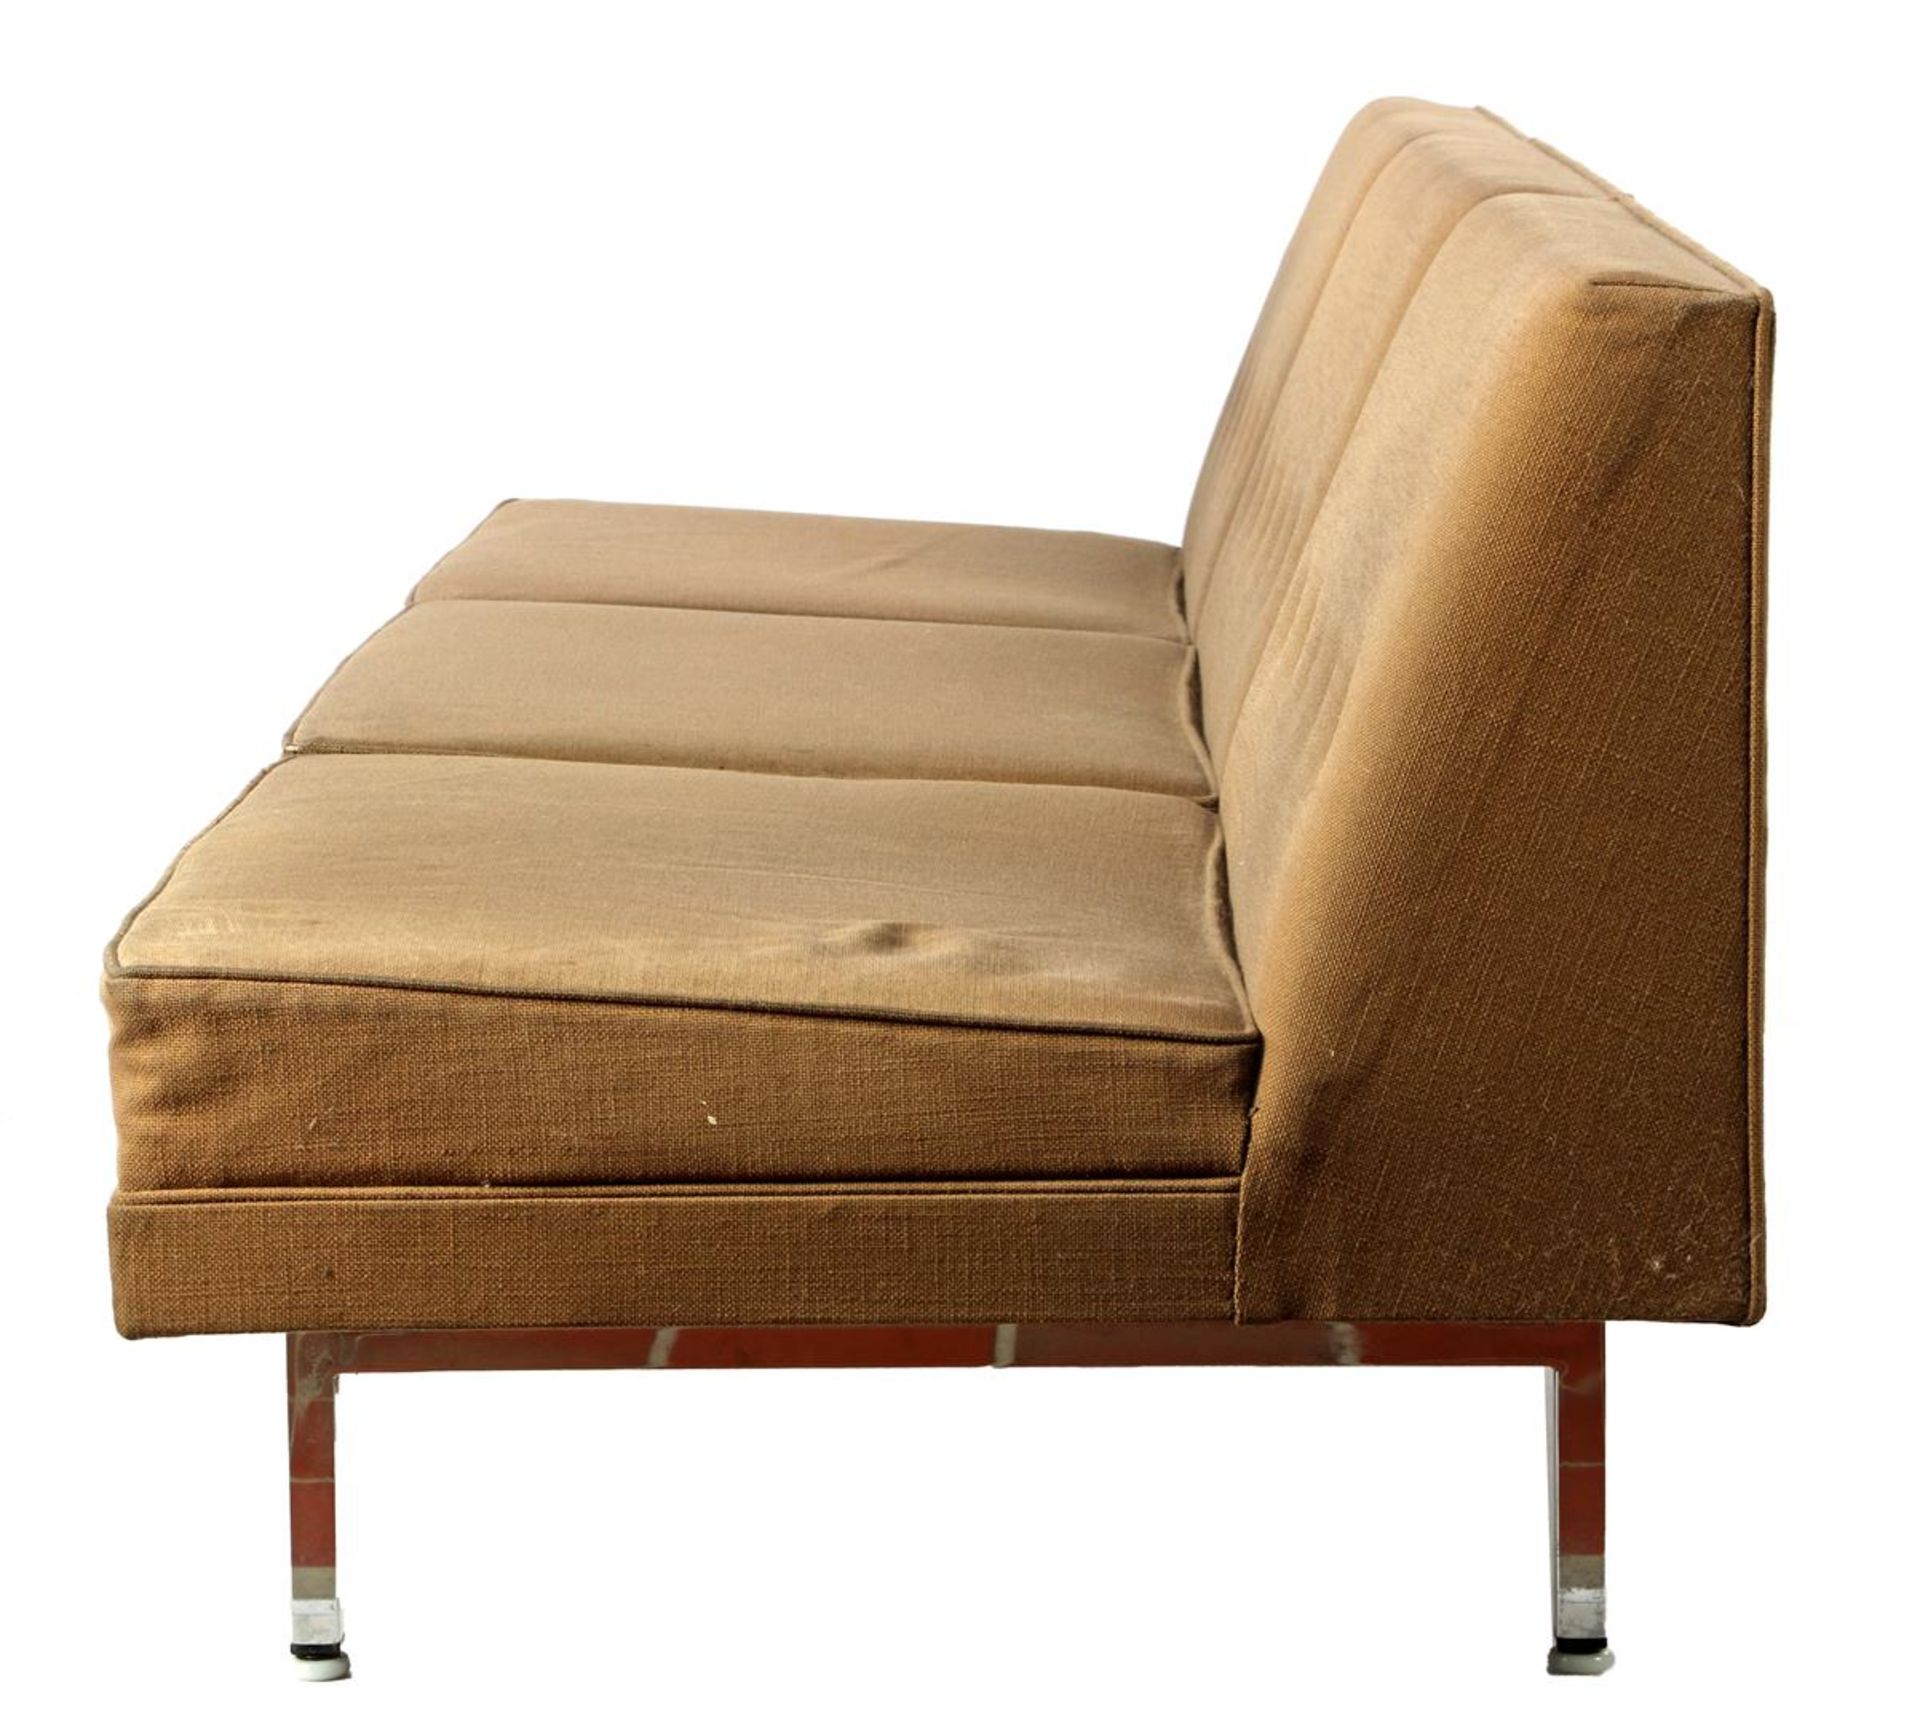 George Nelson (1908-1986) 3-seater army green upholstered sofa - Image 2 of 4